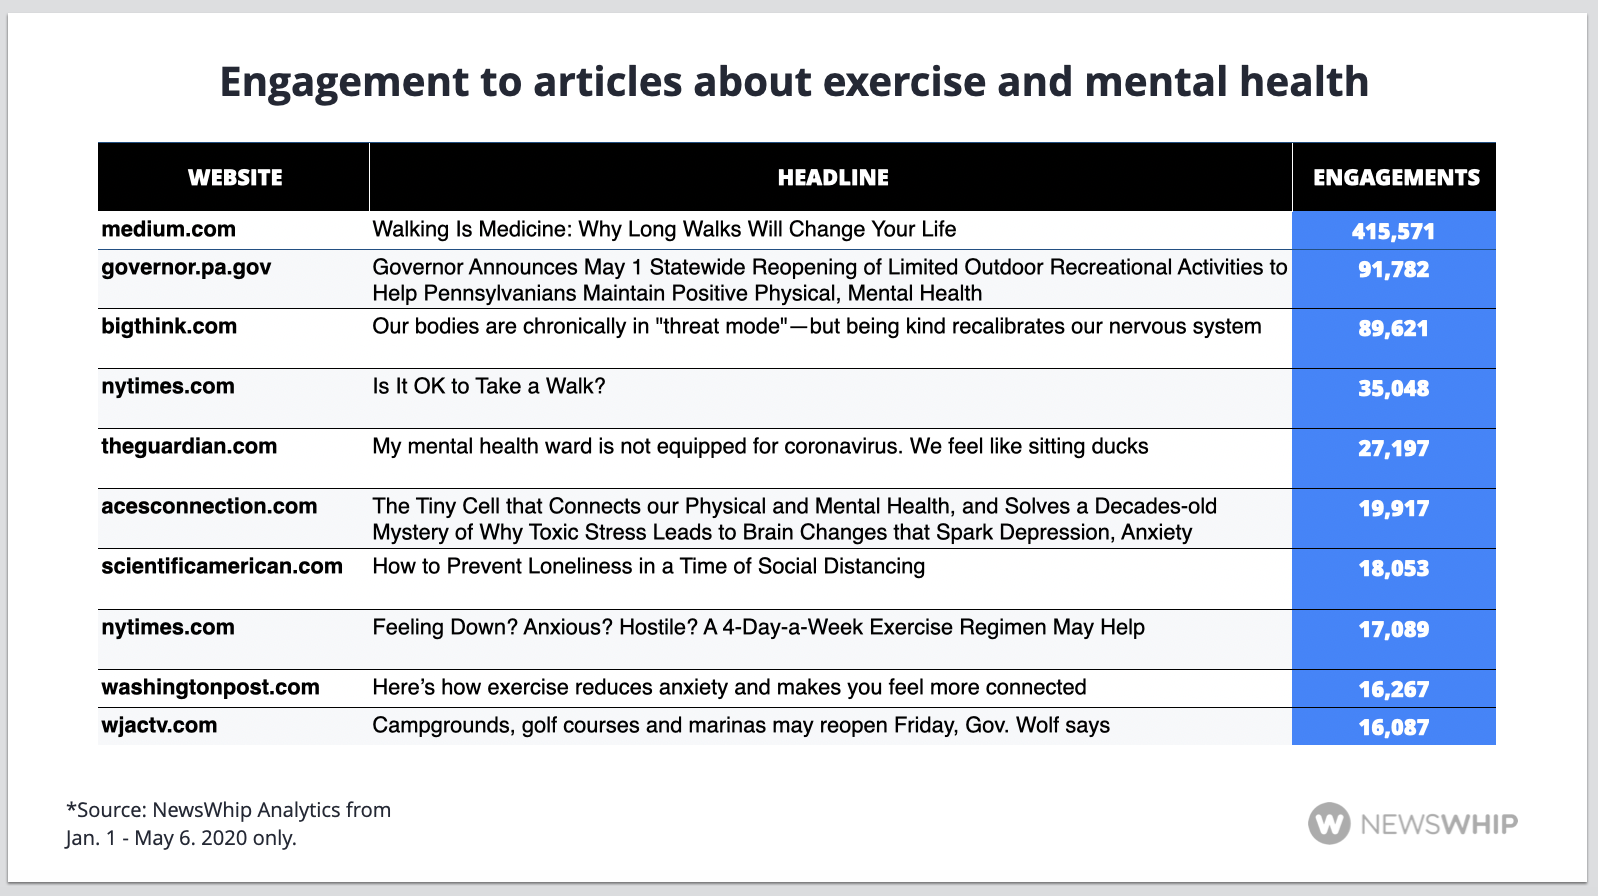 Chart of the top articles about exercise and mental health, ranked by engagement